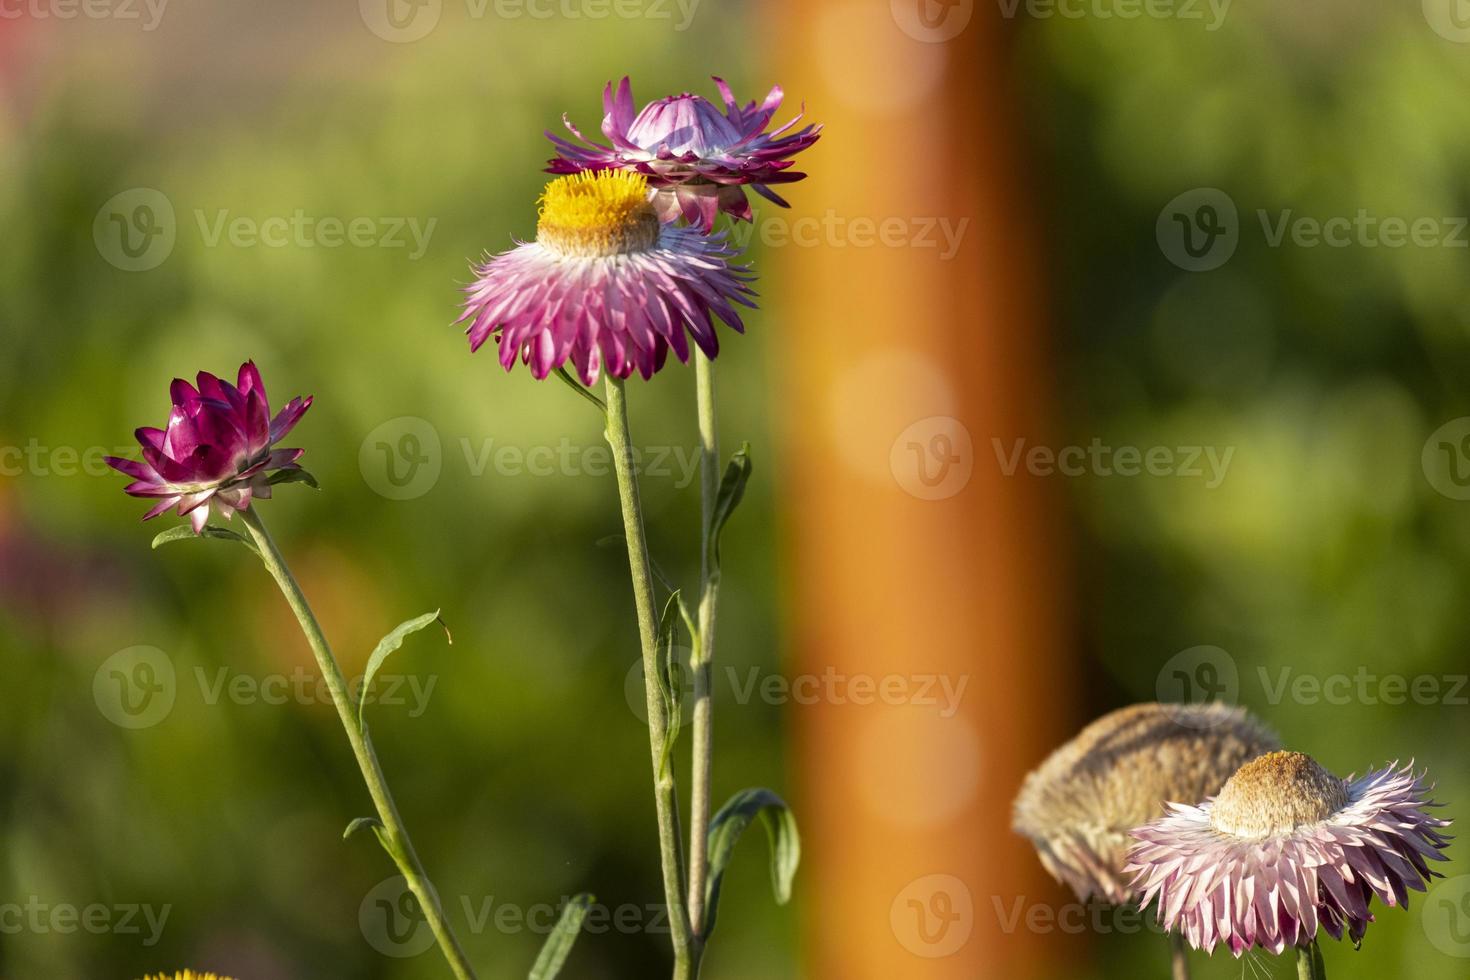 beautiful group of helichrysum violet yellow color fresh flower in botany garden natural park. macro flora orange and pink blooming photo